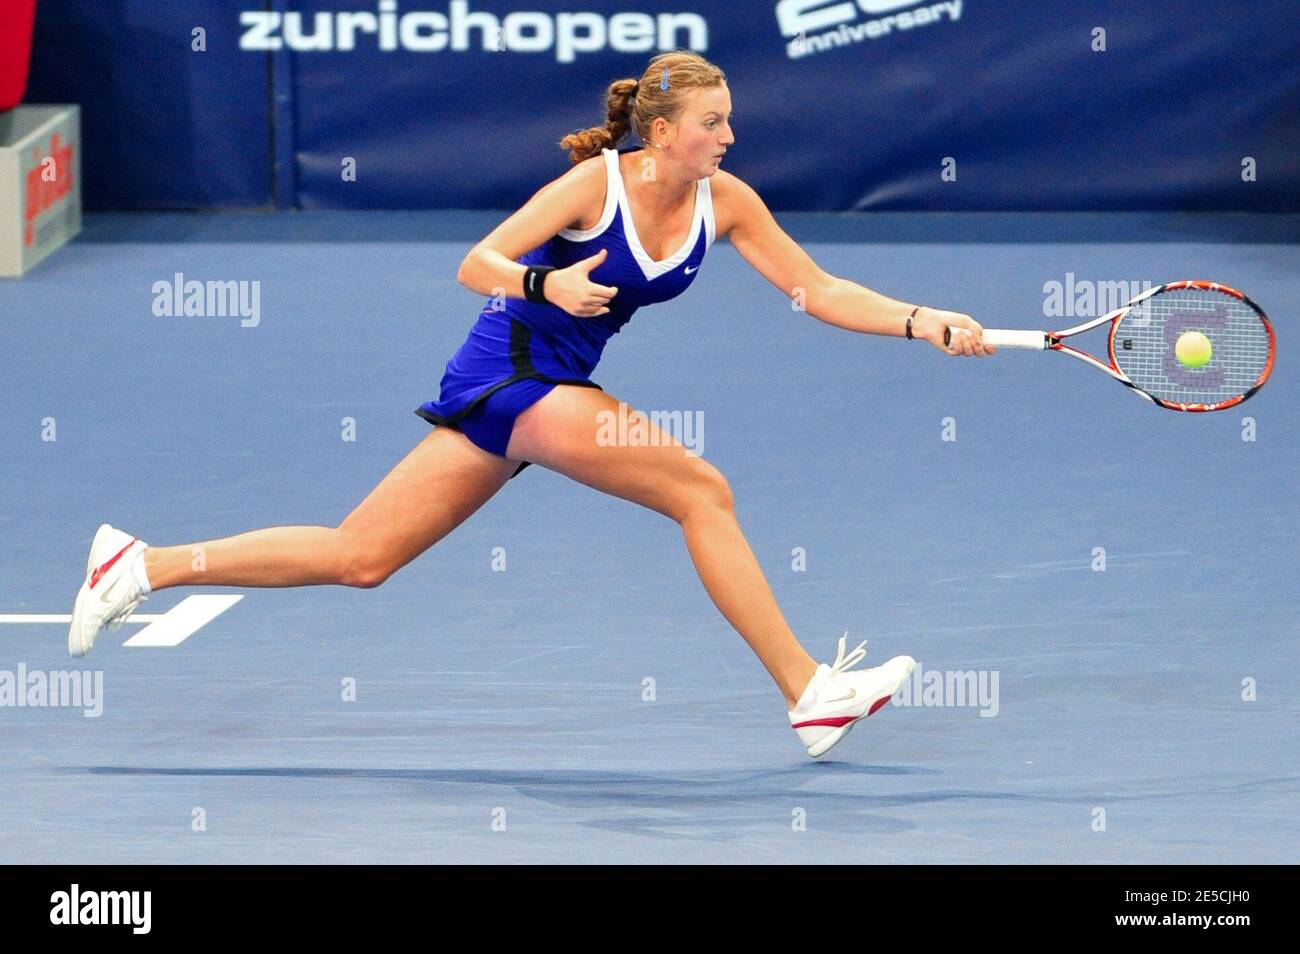 Czech Republic's Petra Kvitova in action during qualifying play at the  Zurich Open in Zurich, Switzerland, on October 13, 2008. Photo by John C  Middlebrook/Call Sport Media/Cameleon/ABACAPRESS.COM Stock Photo - Alamy